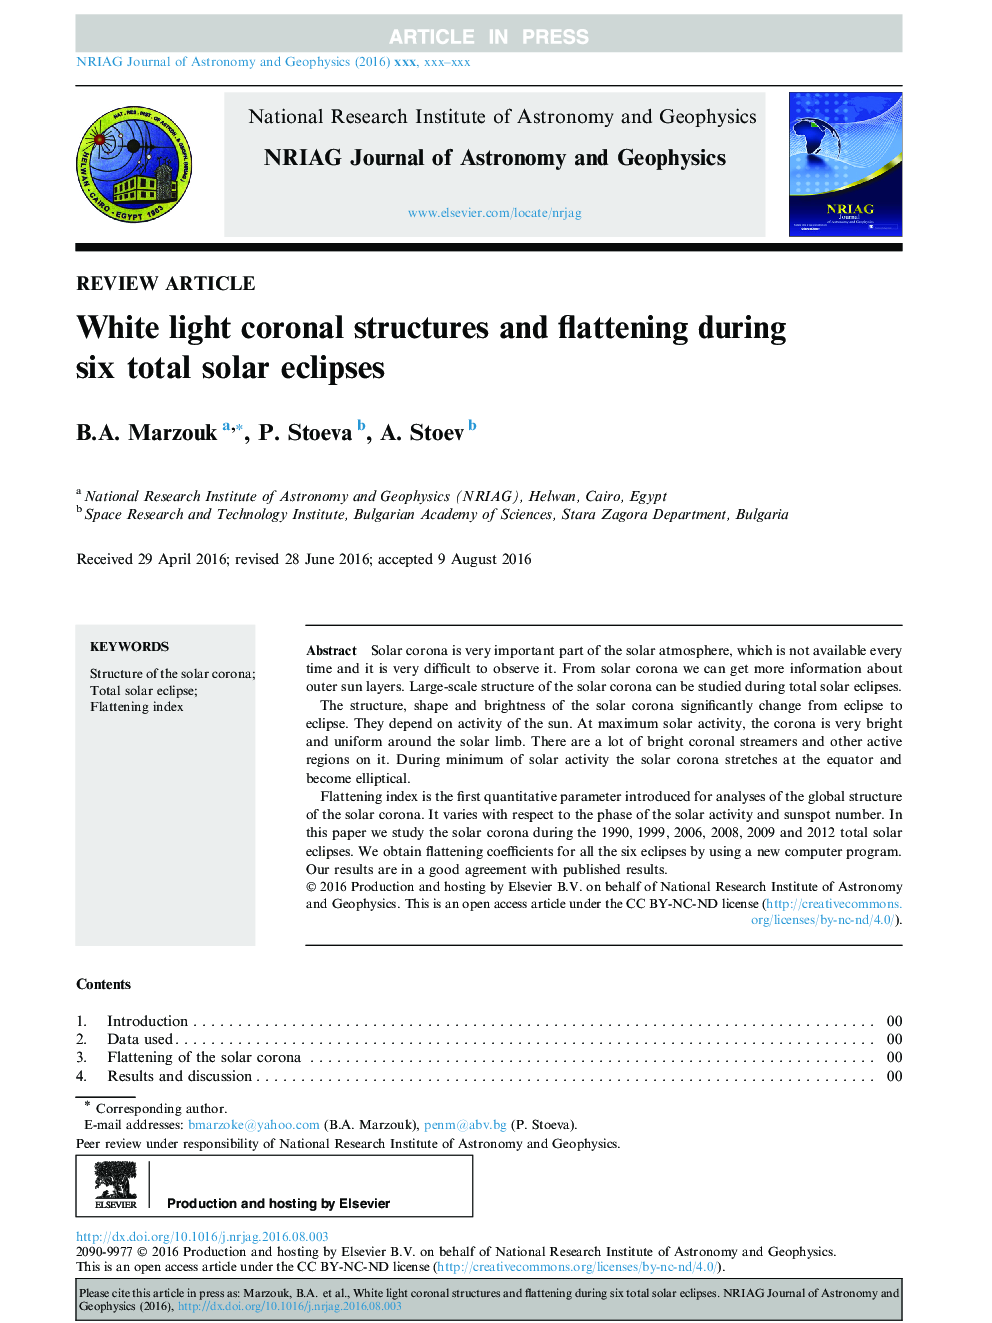 White light coronal structures and flattening during six total solar eclipses